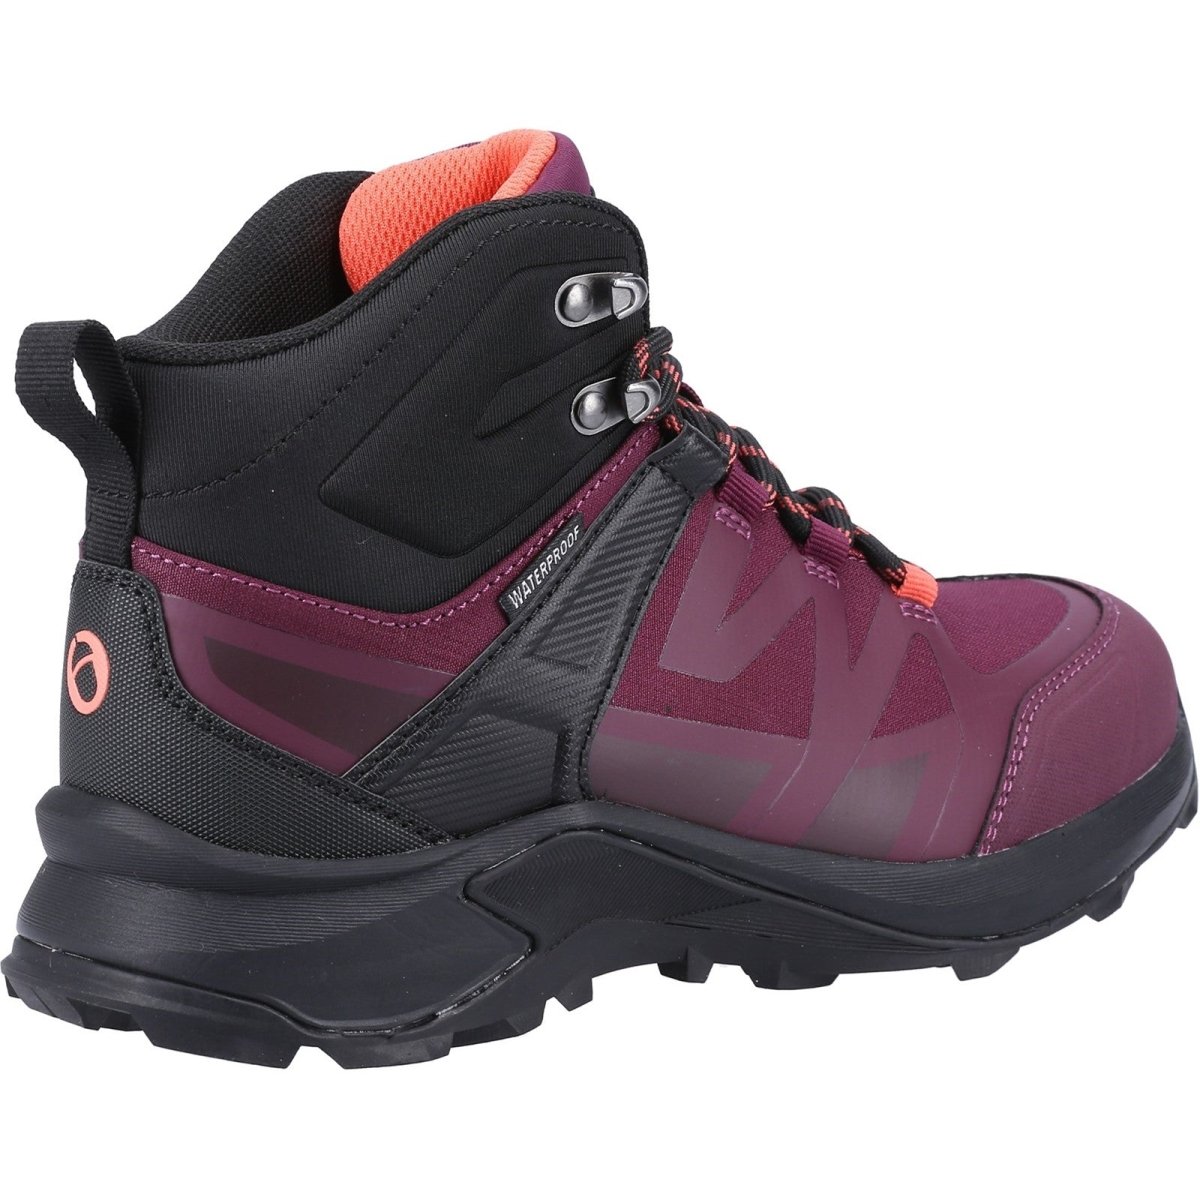 Cotswold Horton Womens Hiking Boots - Shoe Store Direct